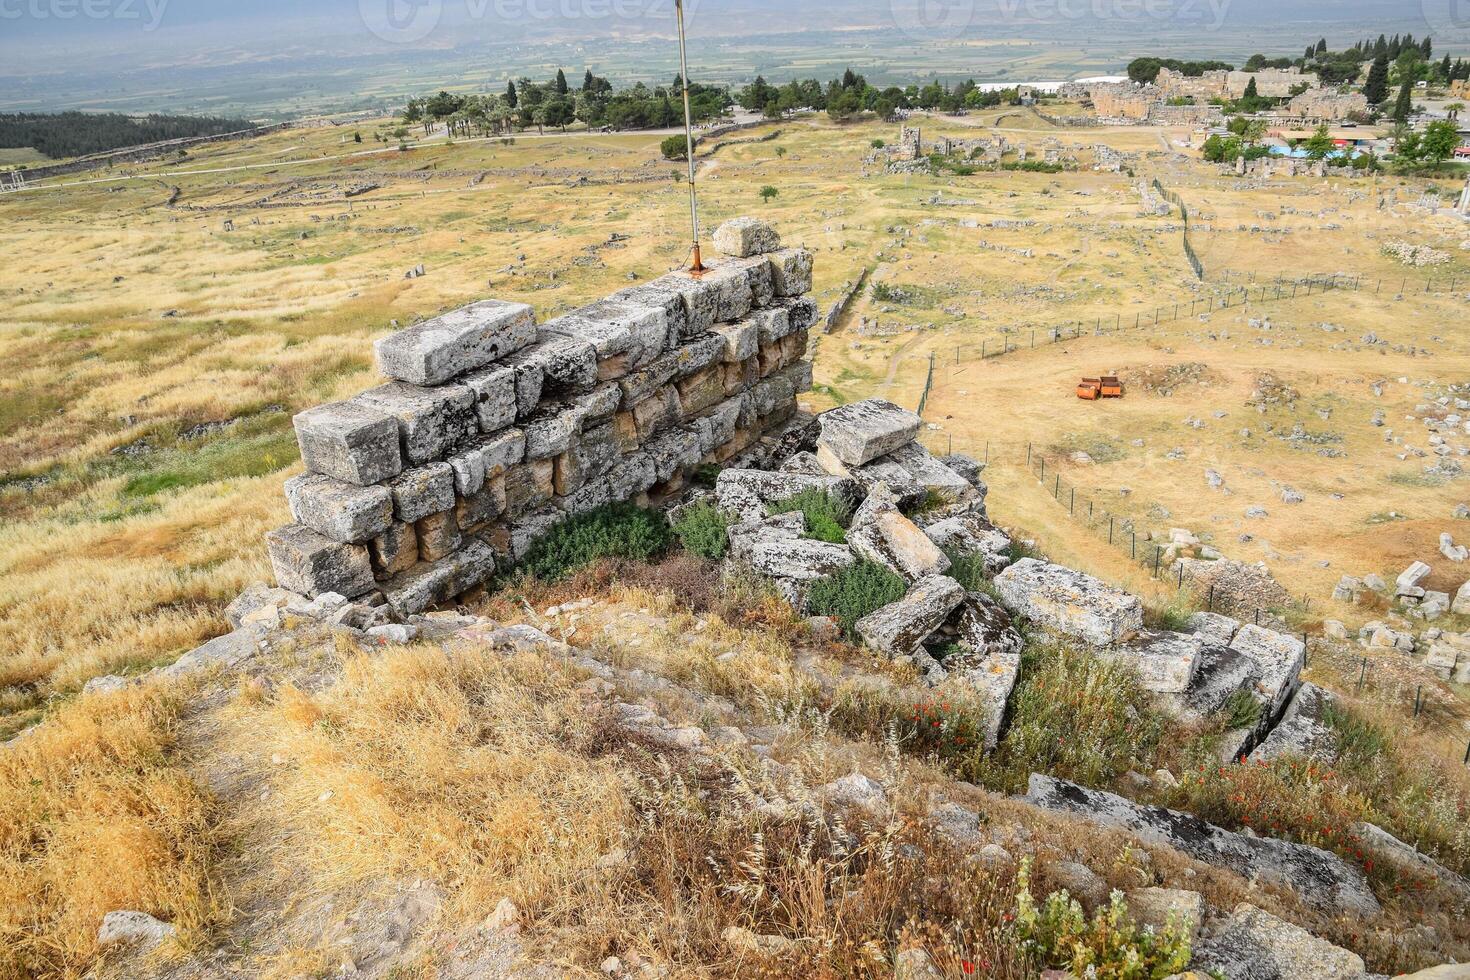 Top view of the excavation site in ruined ancient city of Hierapolis. The remains of destroyed buildings and columns. photo